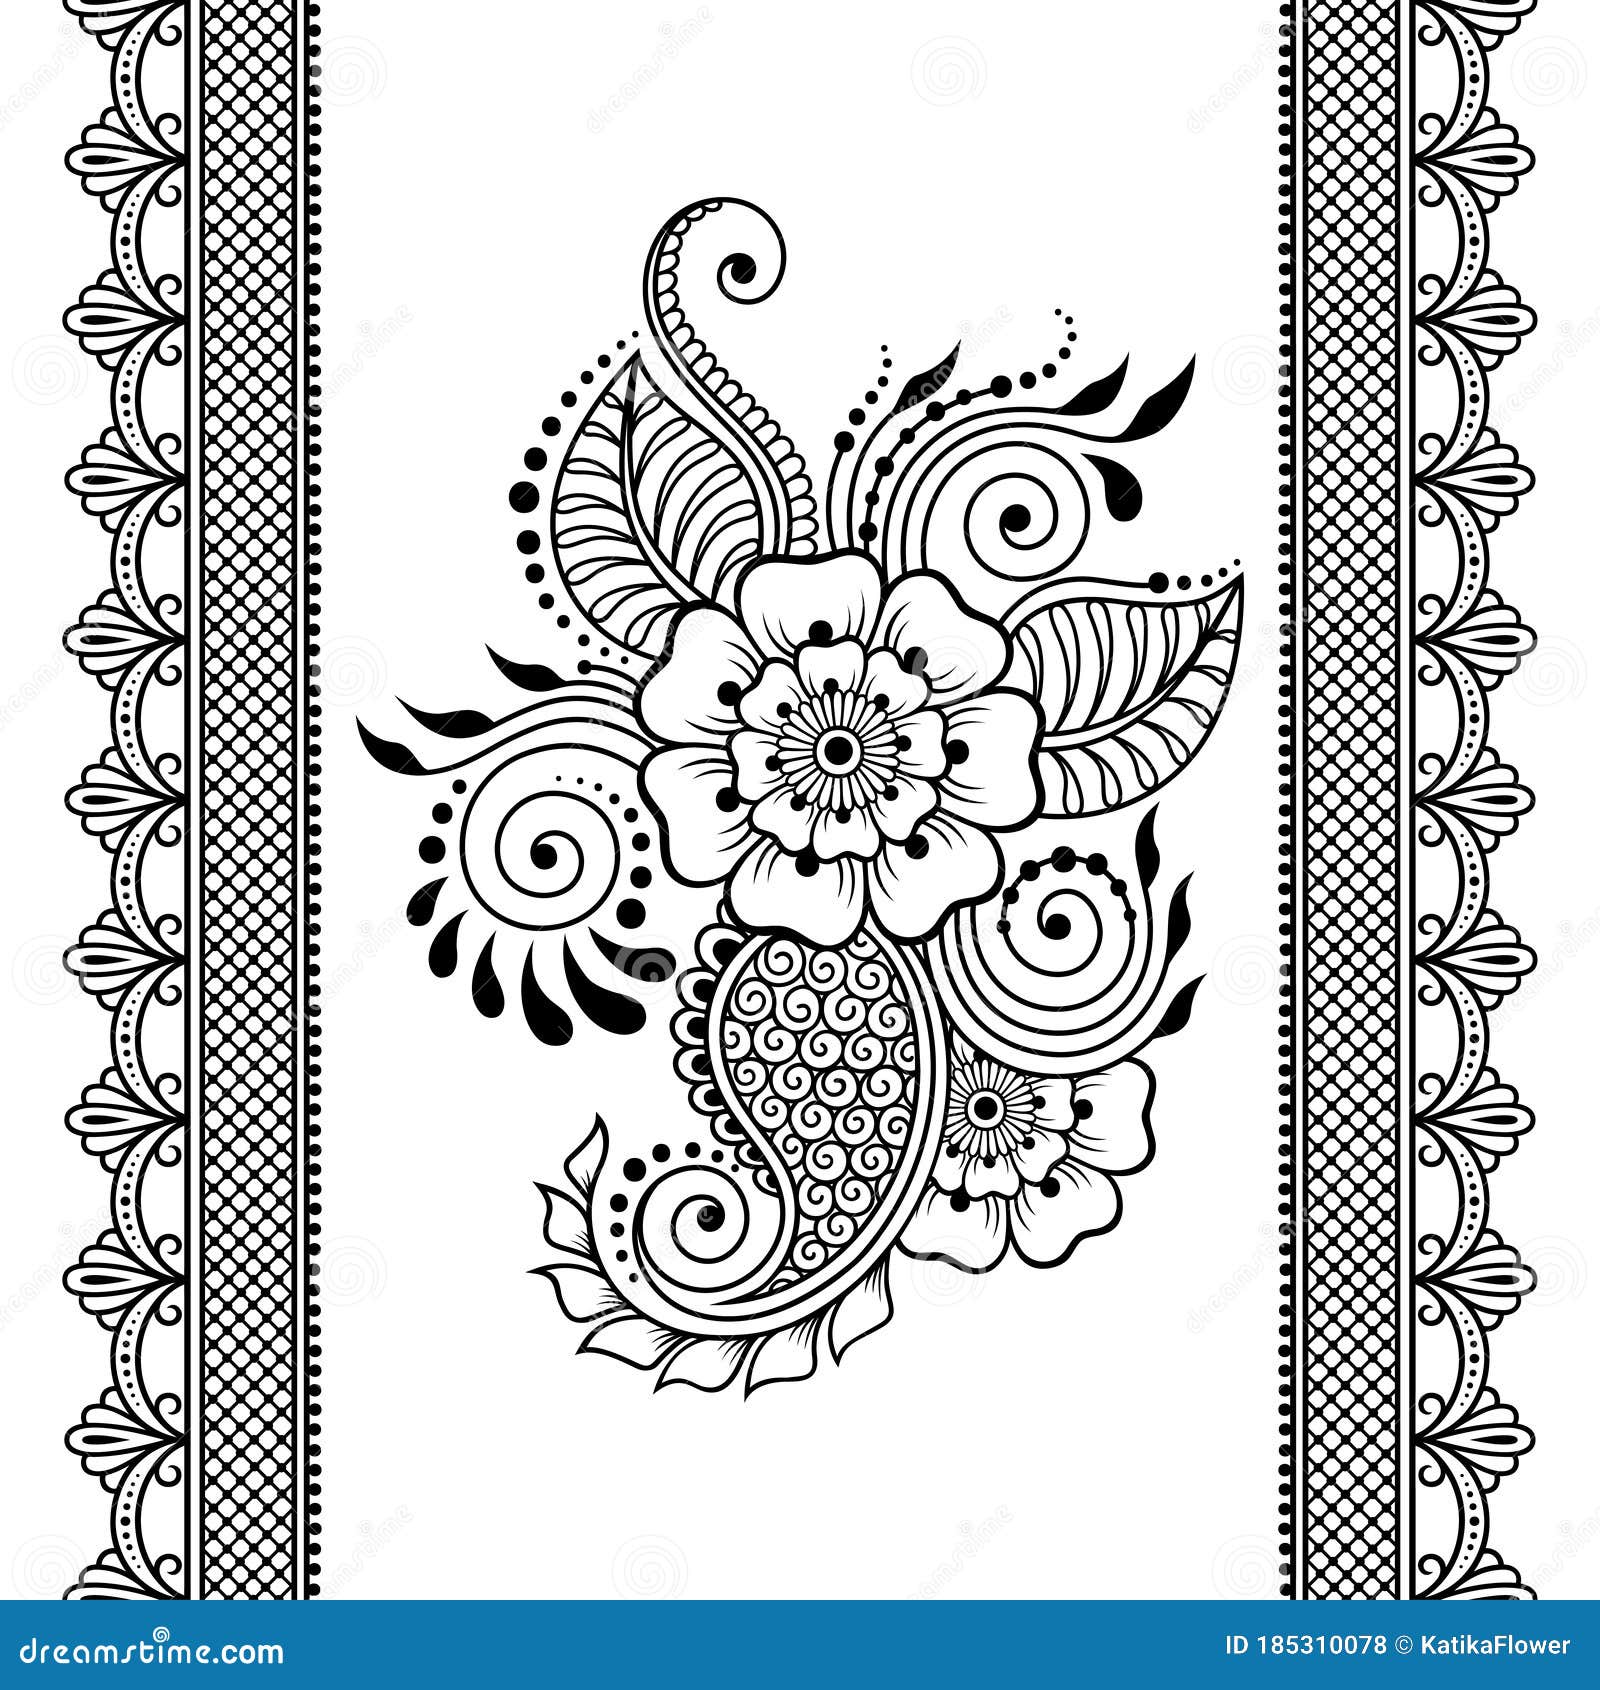 paper for drawing henna - zenamoroccan